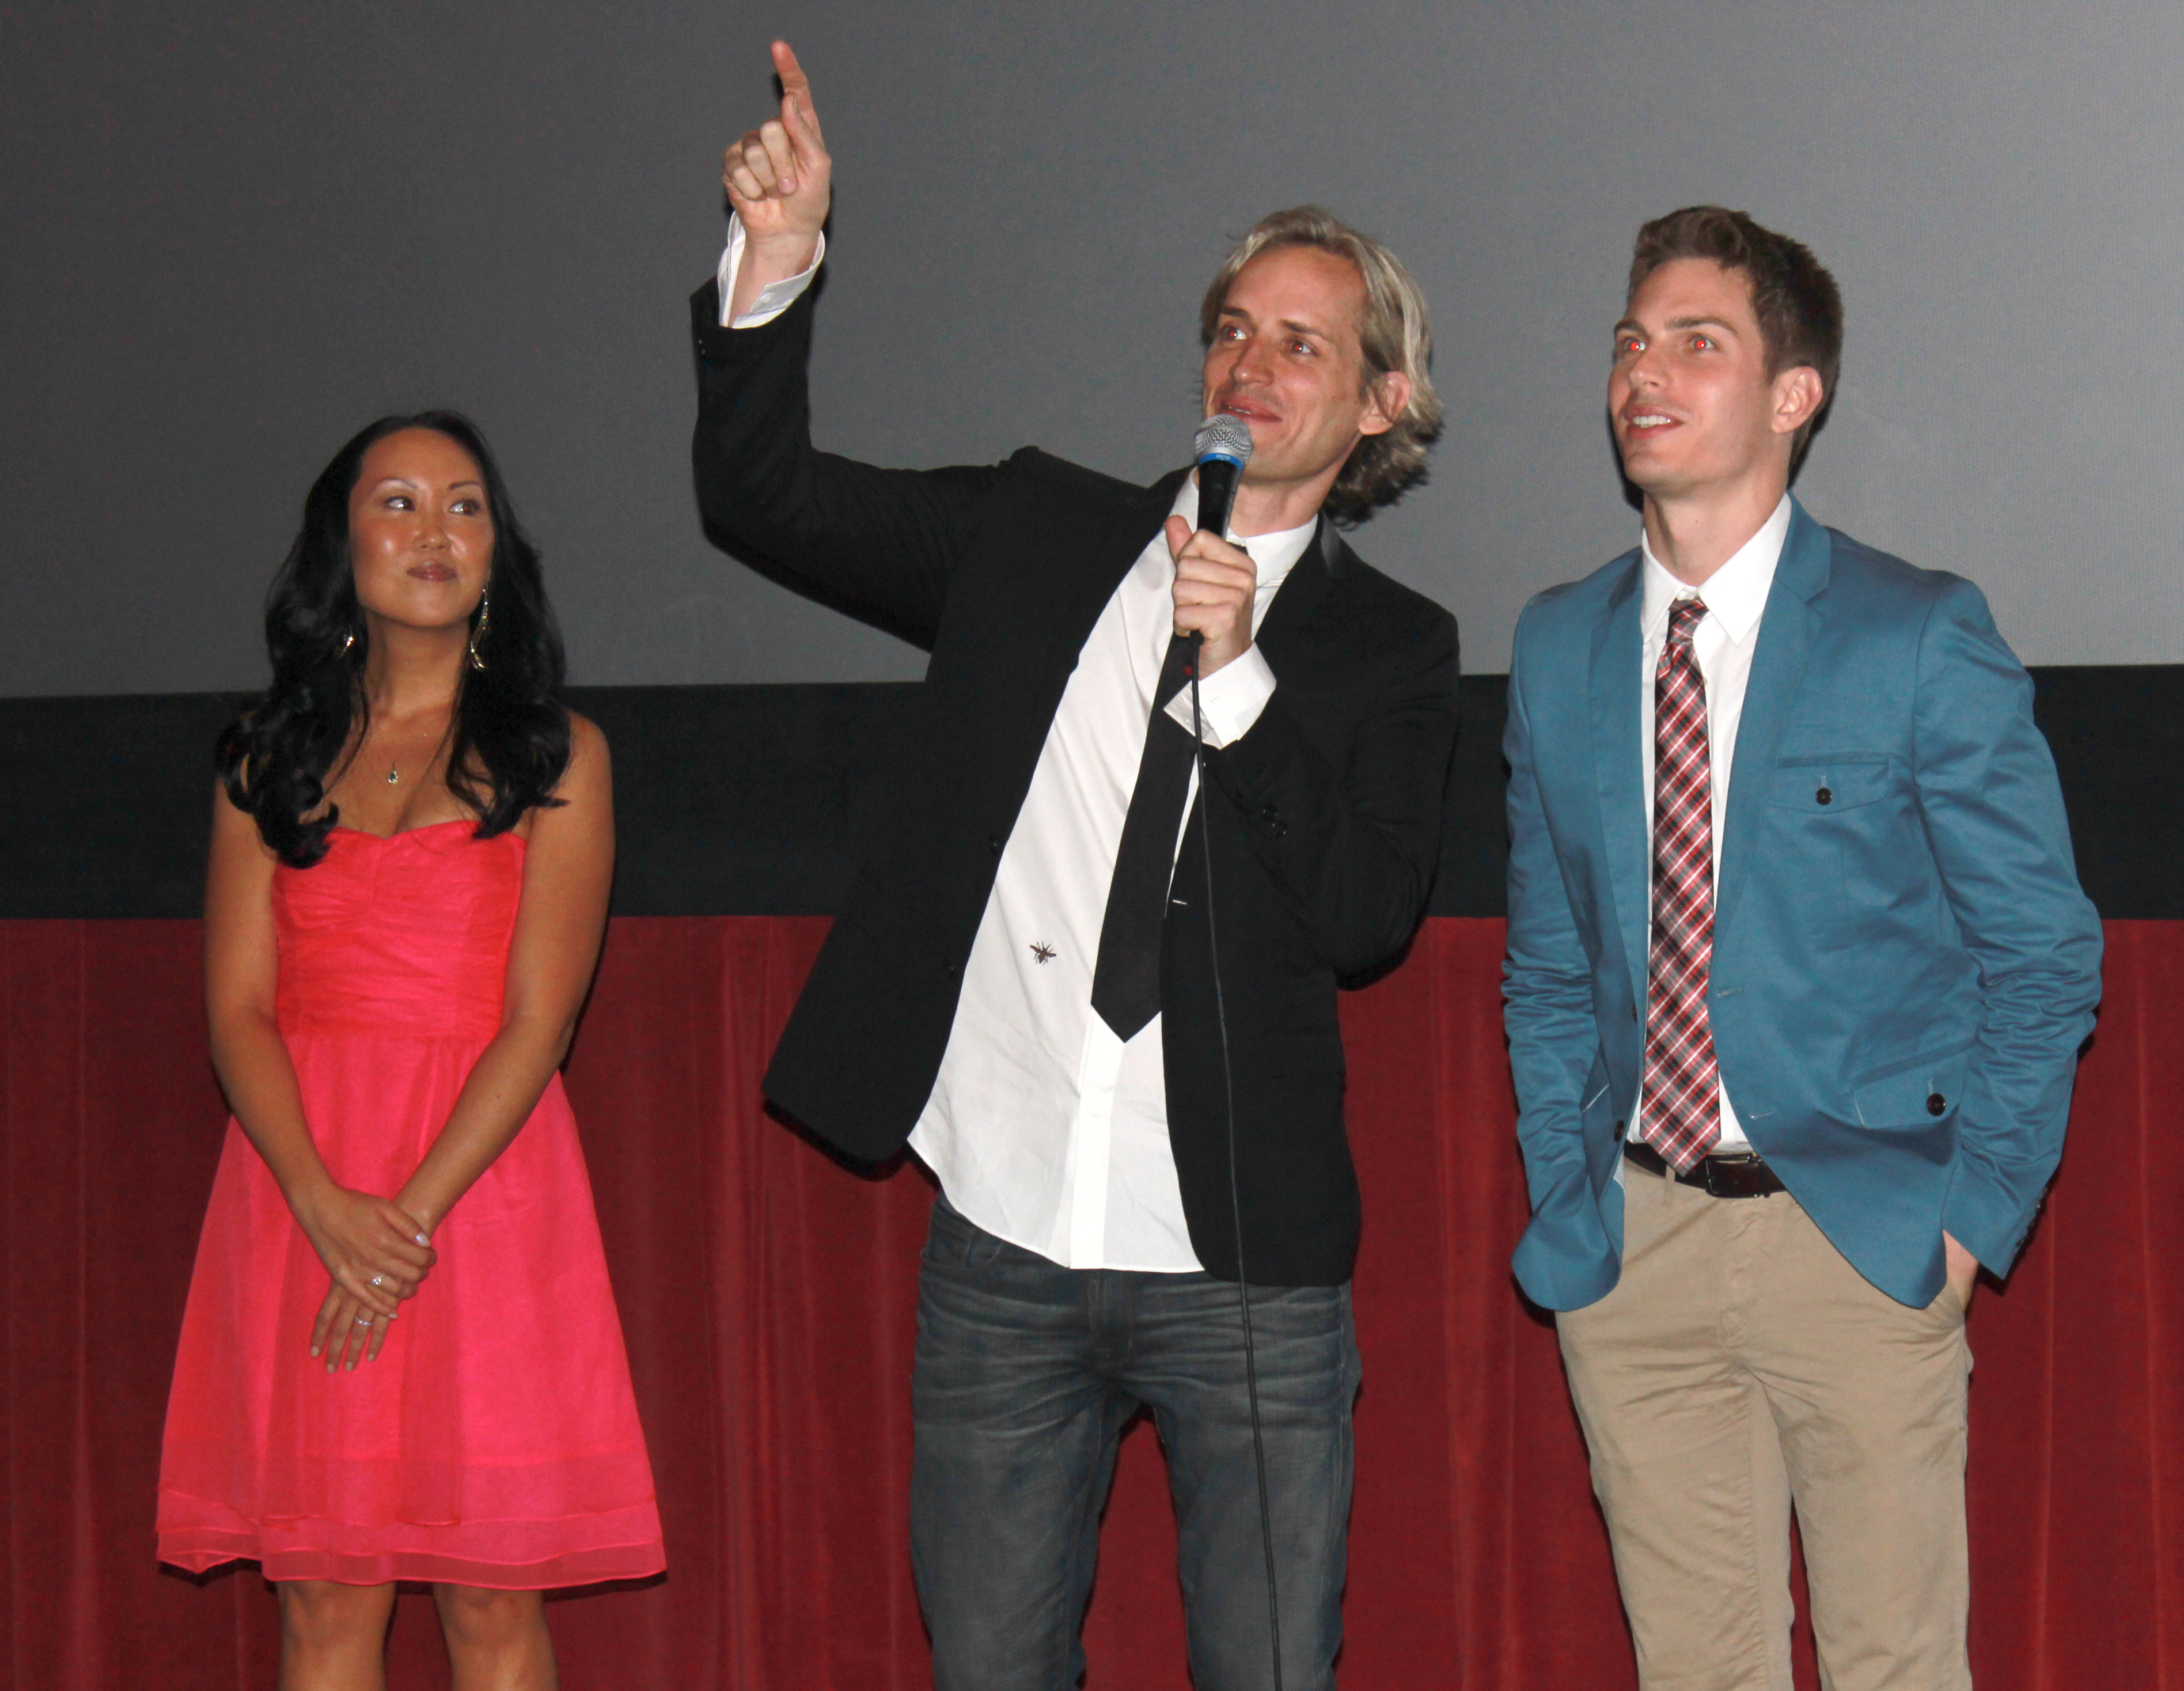 Angelina Hong, Casper Andreas, and Matthew Ludwinski at the opening night screening of GOING DOWN IN LA-LA LAND at the Chinese Theaters in Los Angeles, May 2012.